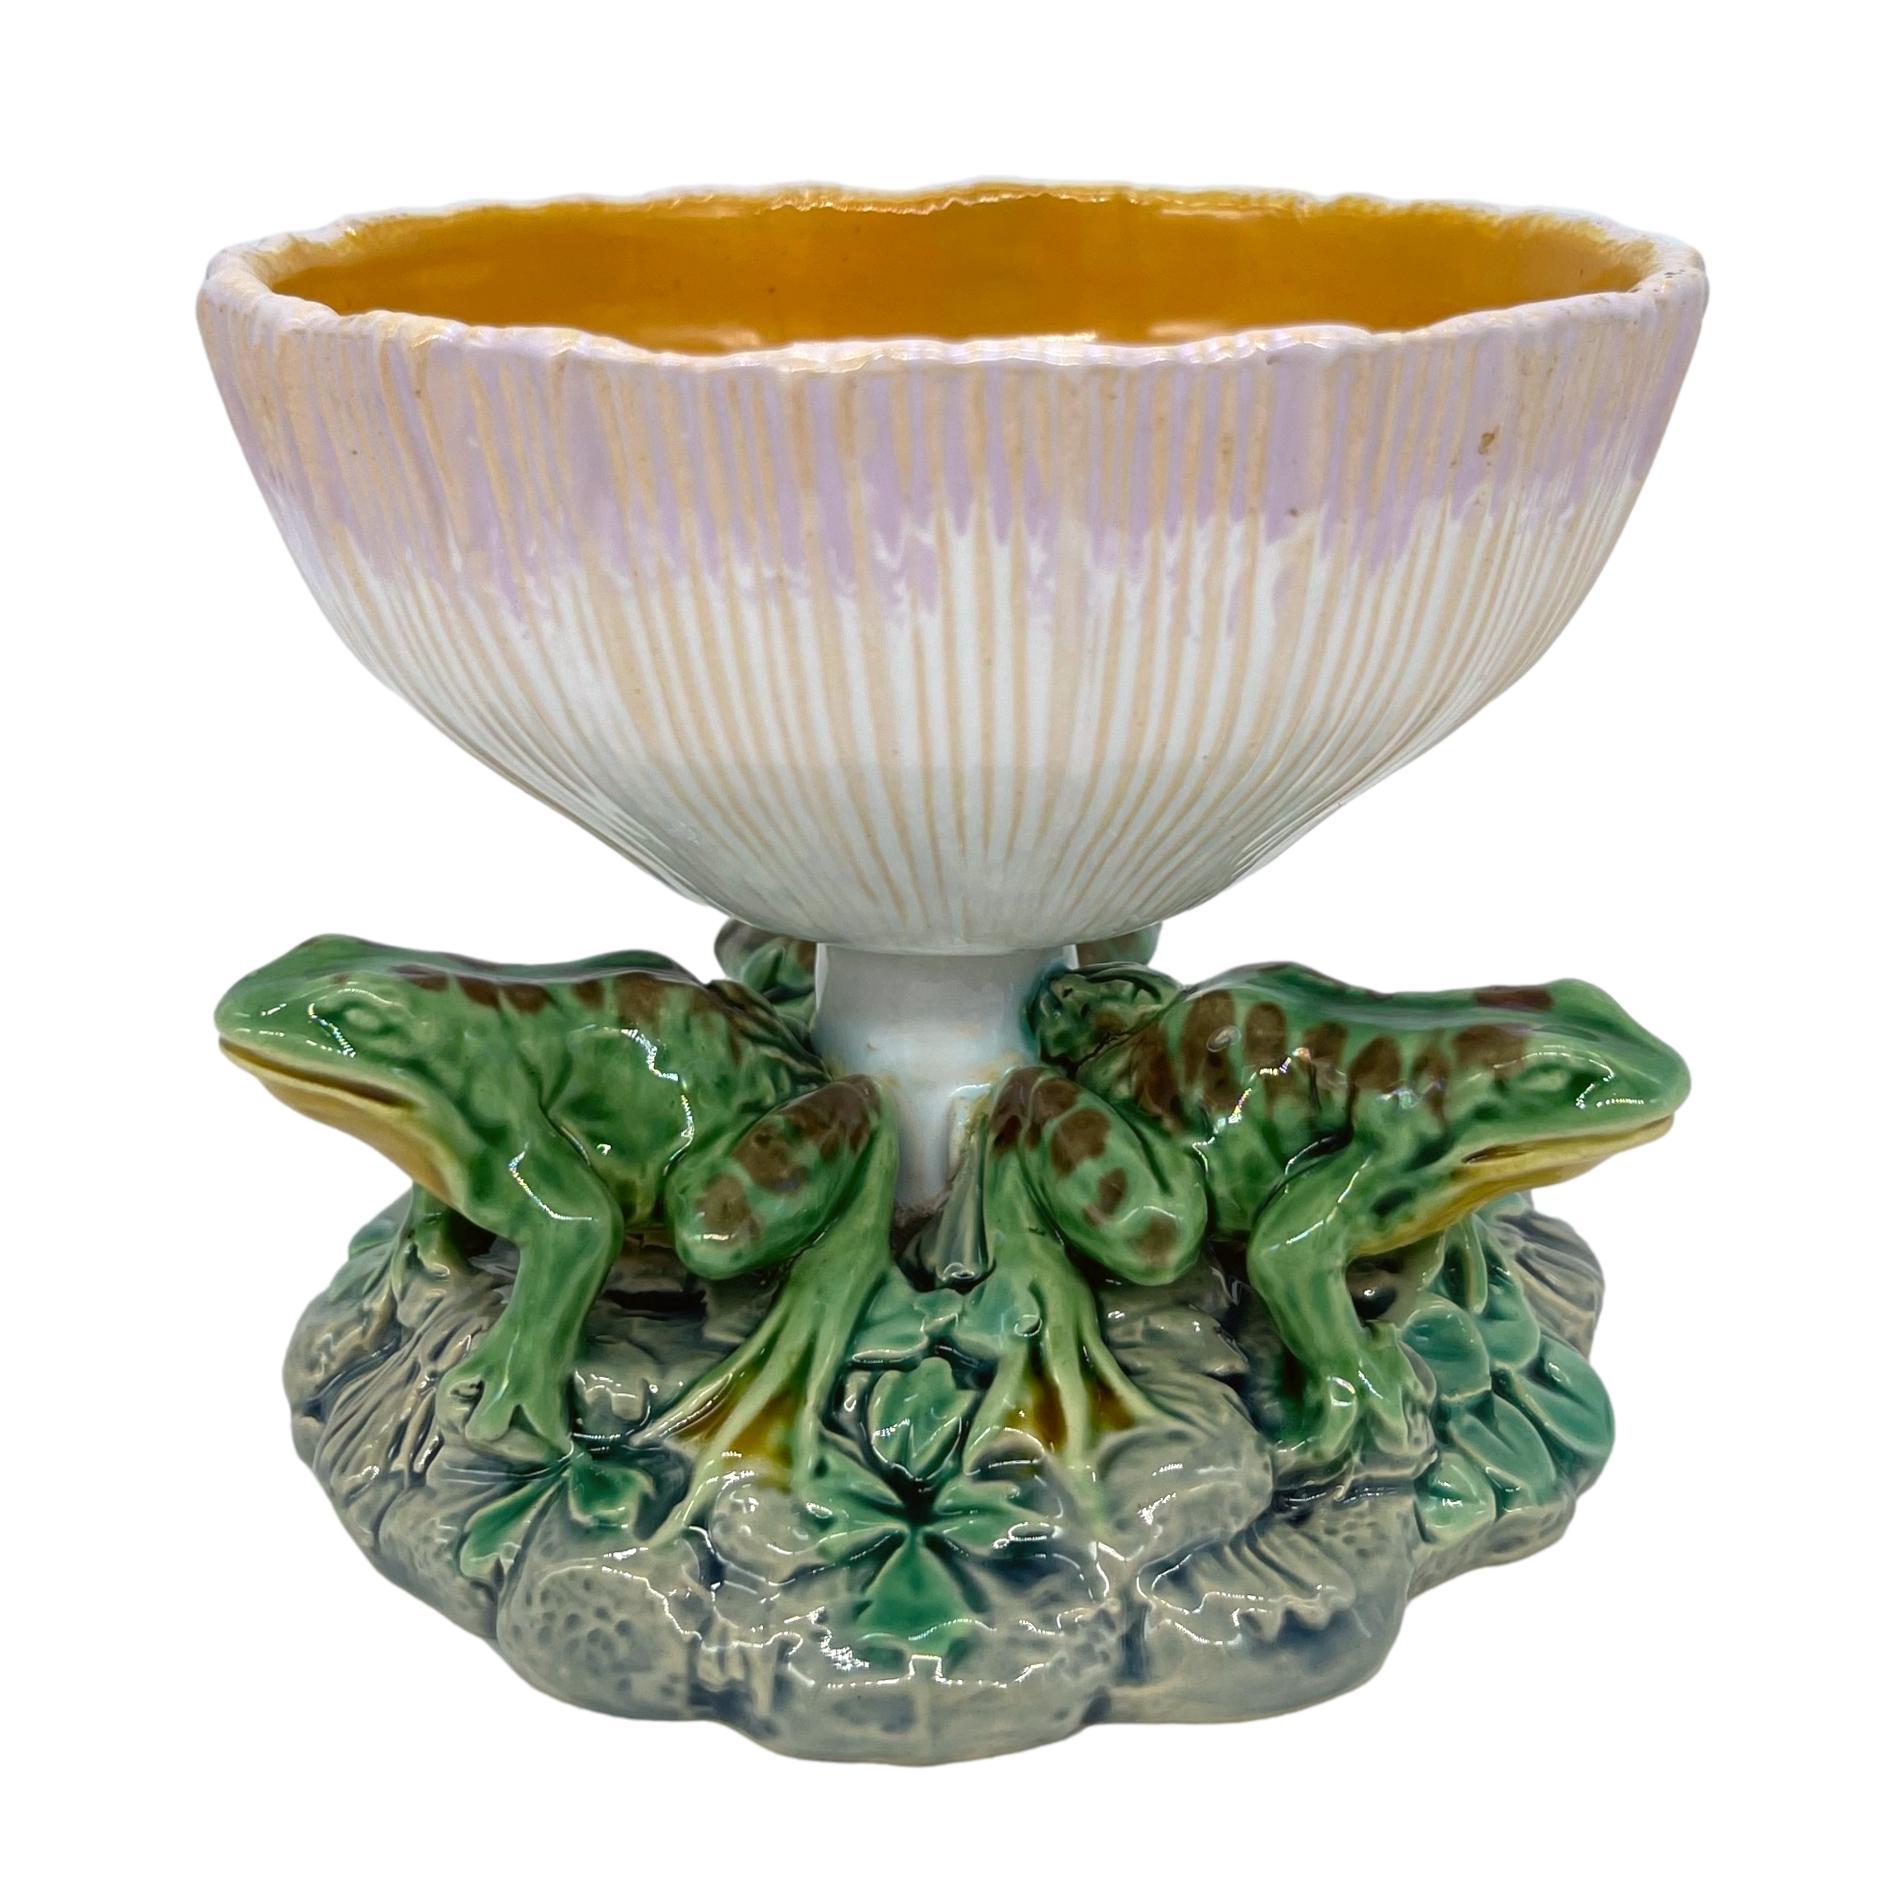 Victorian Minton Majolica Mushroom Tazza with Three-Frog Base, English, Dated 1868 For Sale